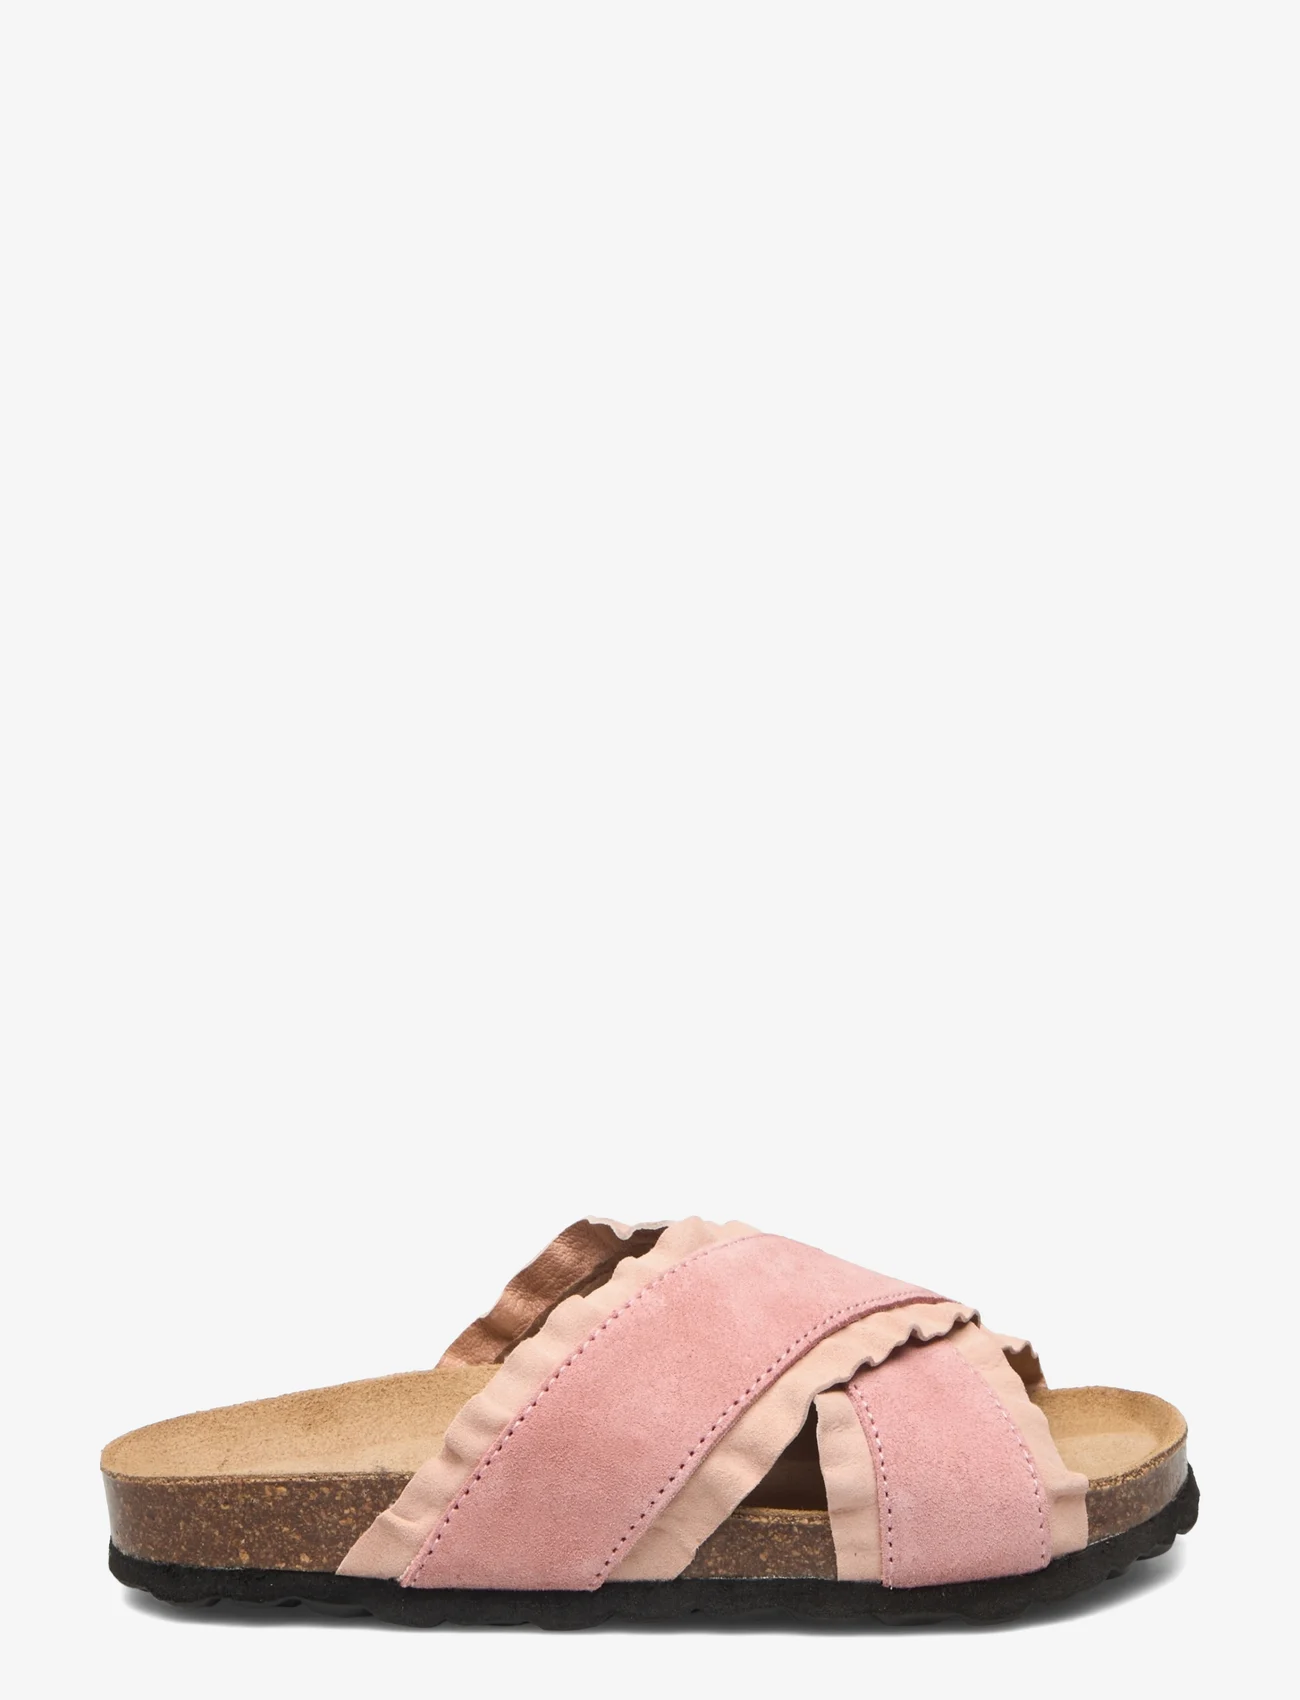 Sofie Schnoor Baby and Kids - Sandal - sommarfynd - light rose - 1